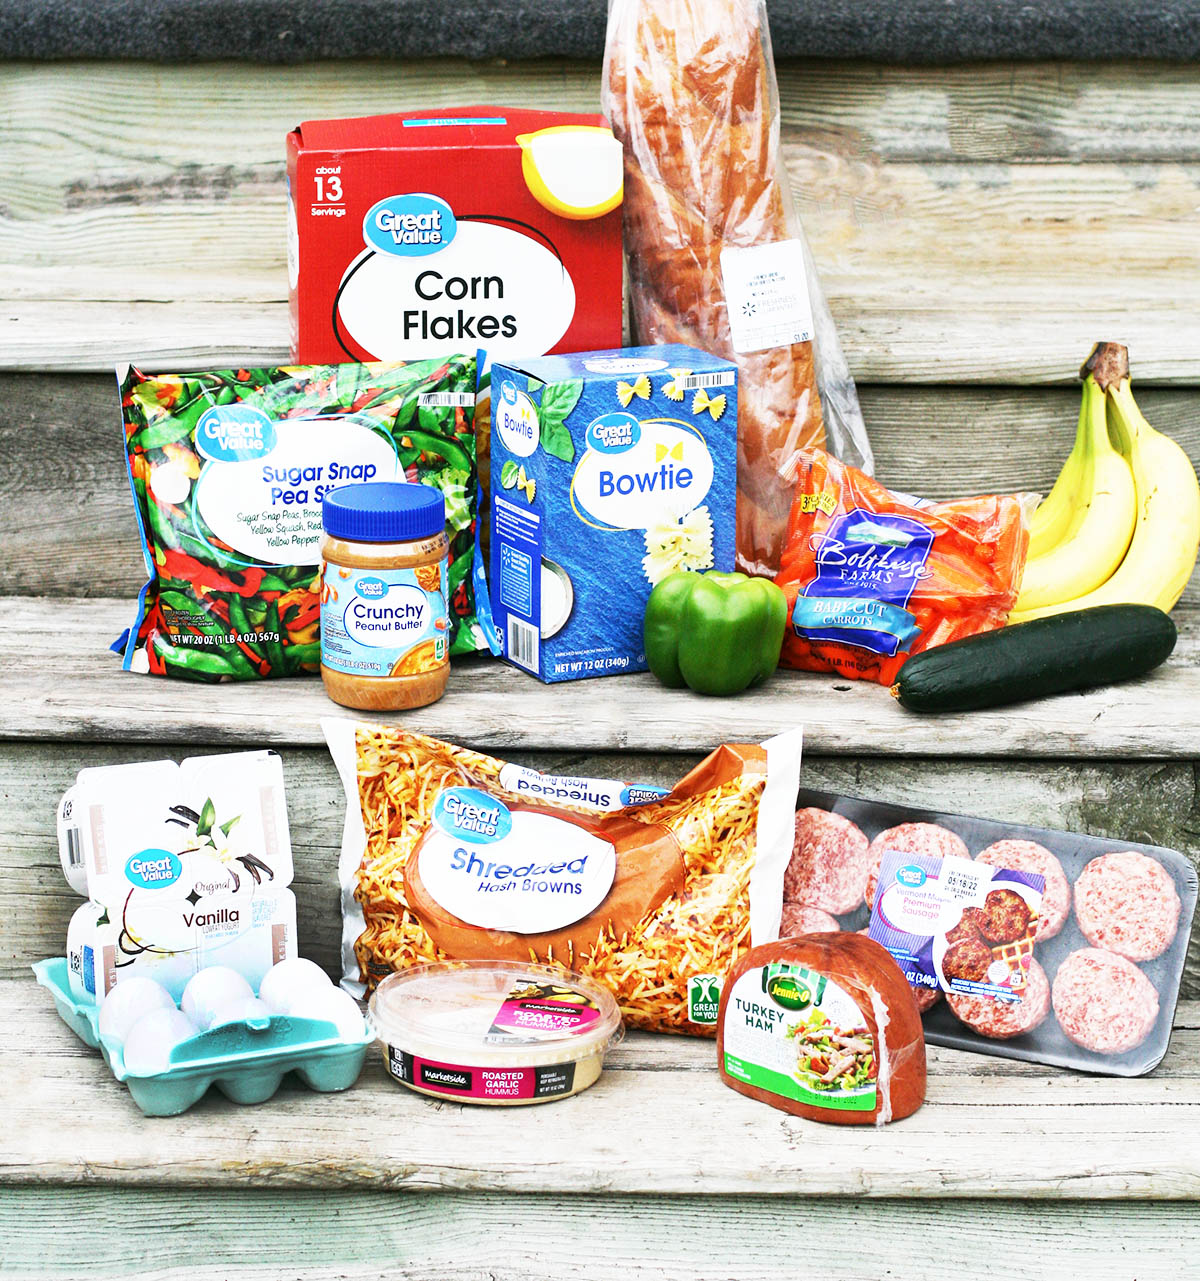 What $25 buys at Walmart for groceries: Learn how to get the most bang for your buck while shopping at Walmart.